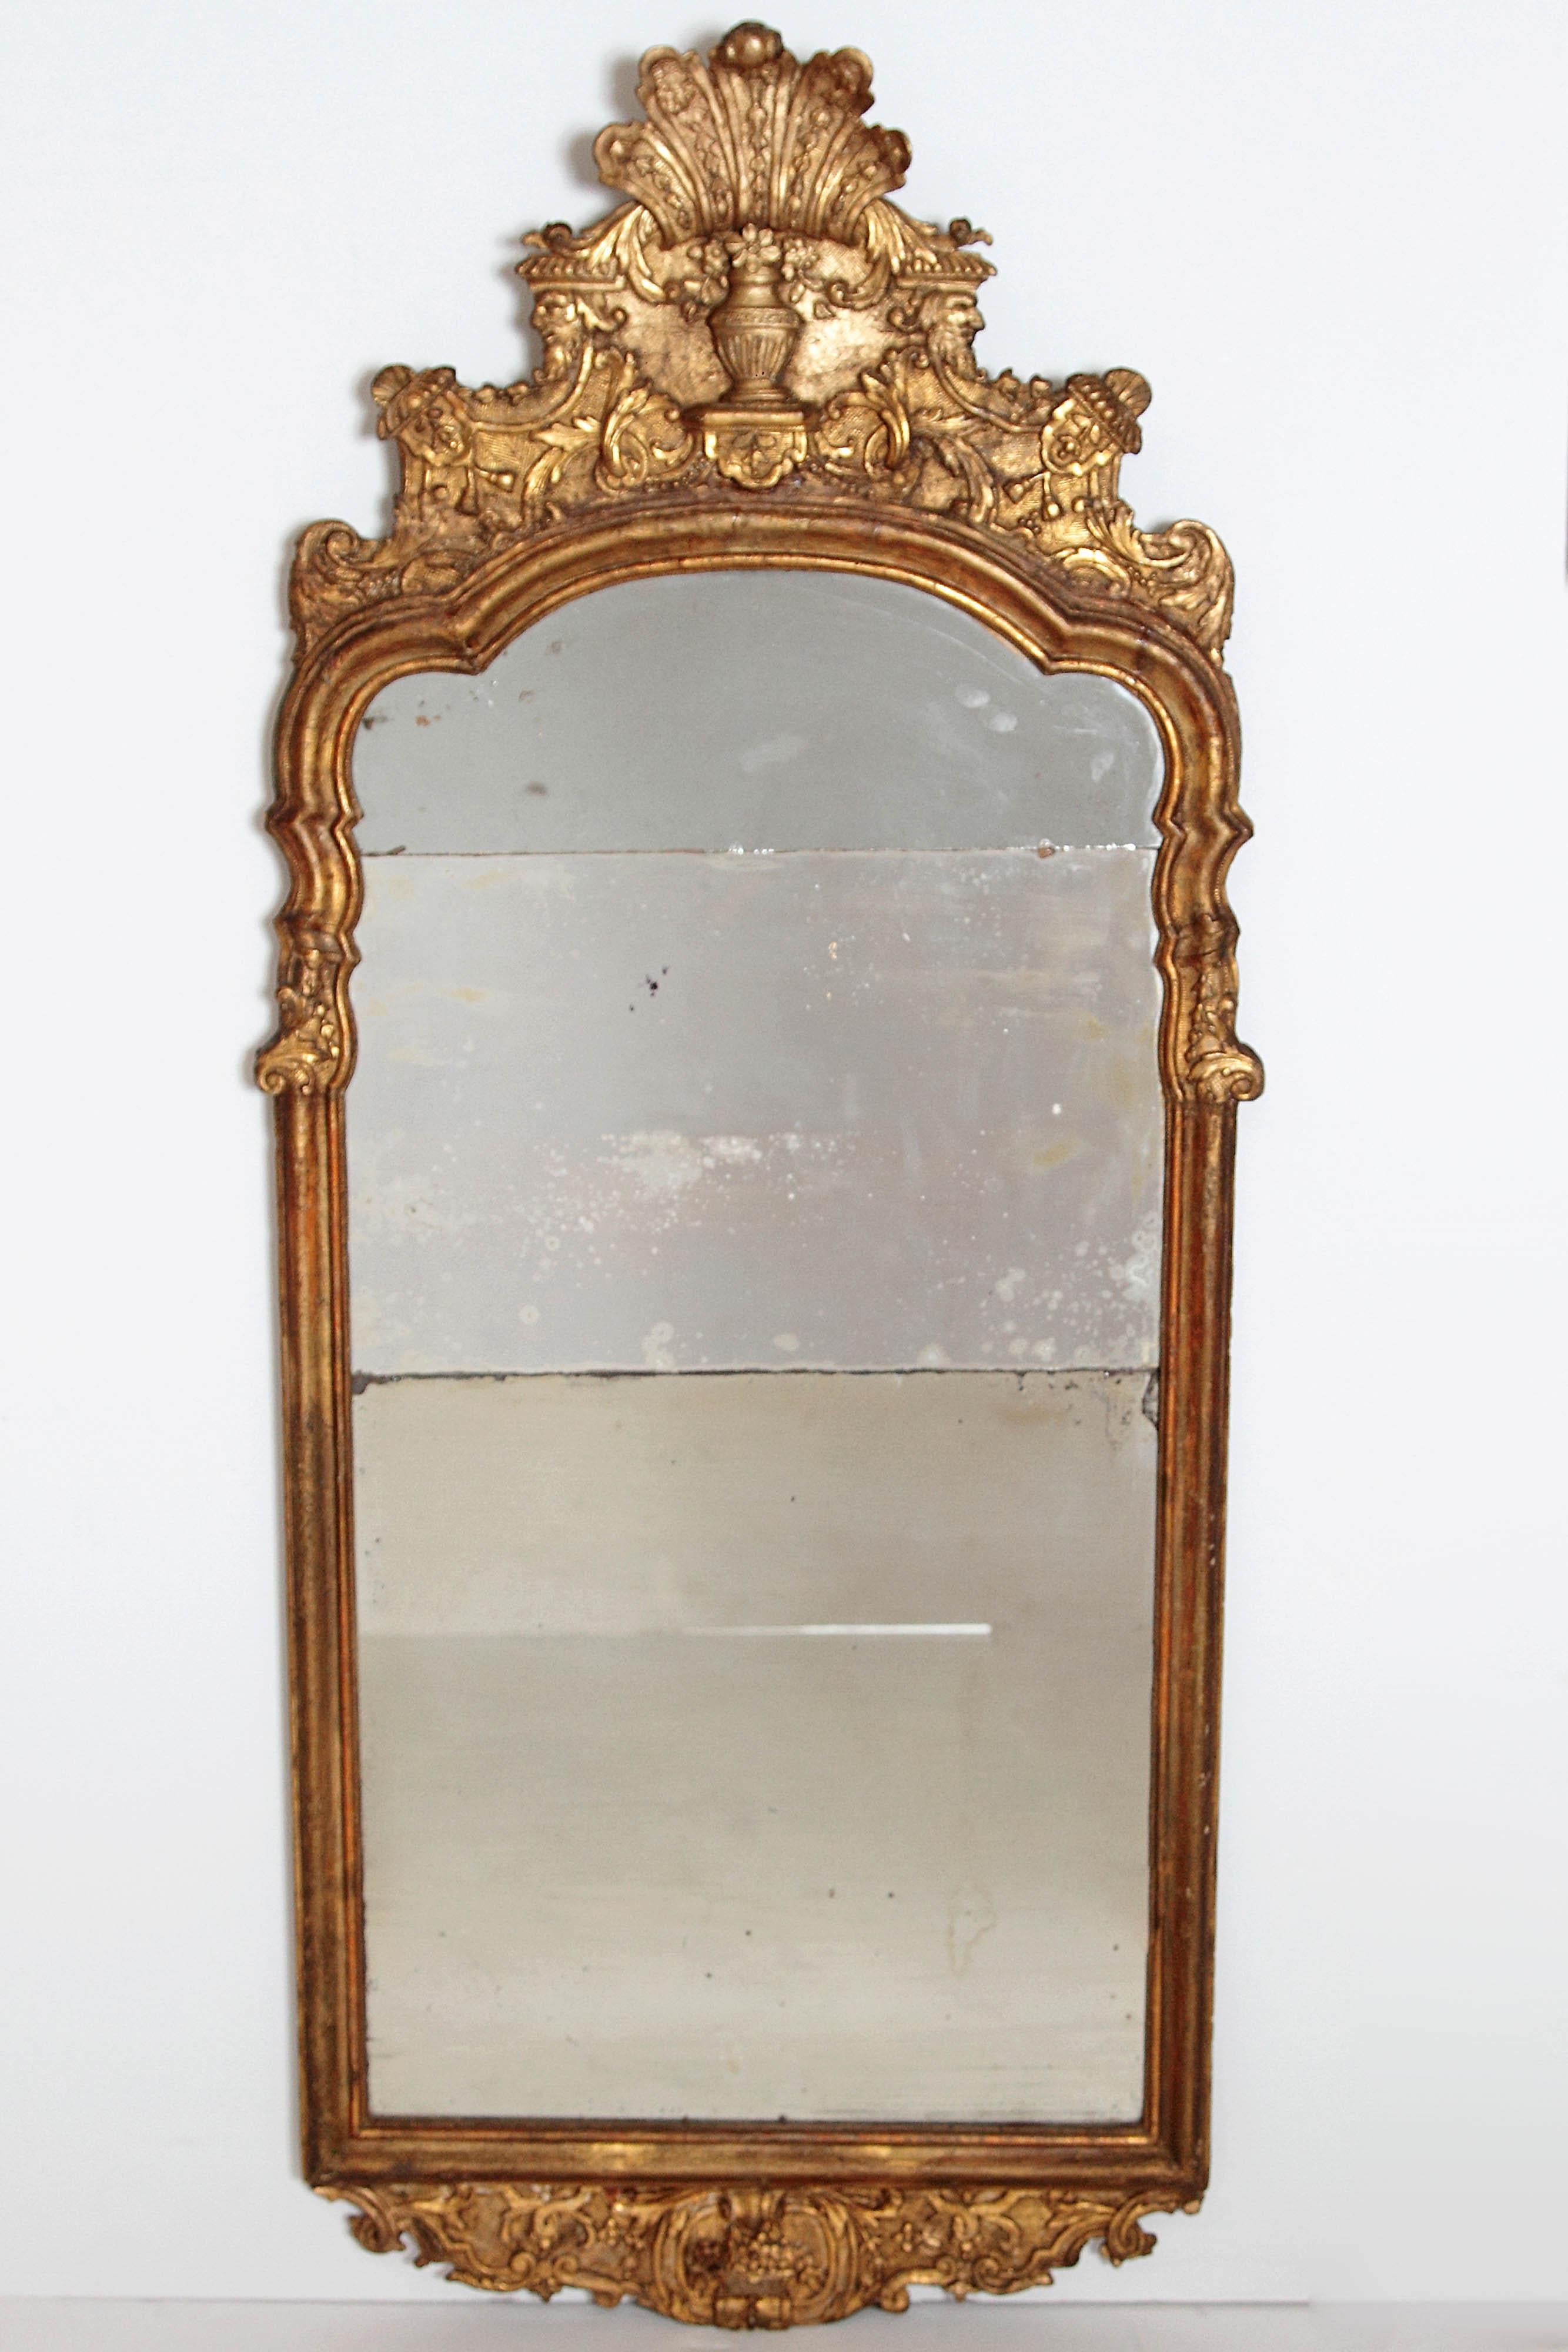 A large period Queen Anne gilt-gesso mirror in gilt frame with elaborate crown and base. Intricate crosshatching in background with acanthus leaf and foliage carvings. Crown has urn with five feather forms at top. Mirror plate is in three parts.